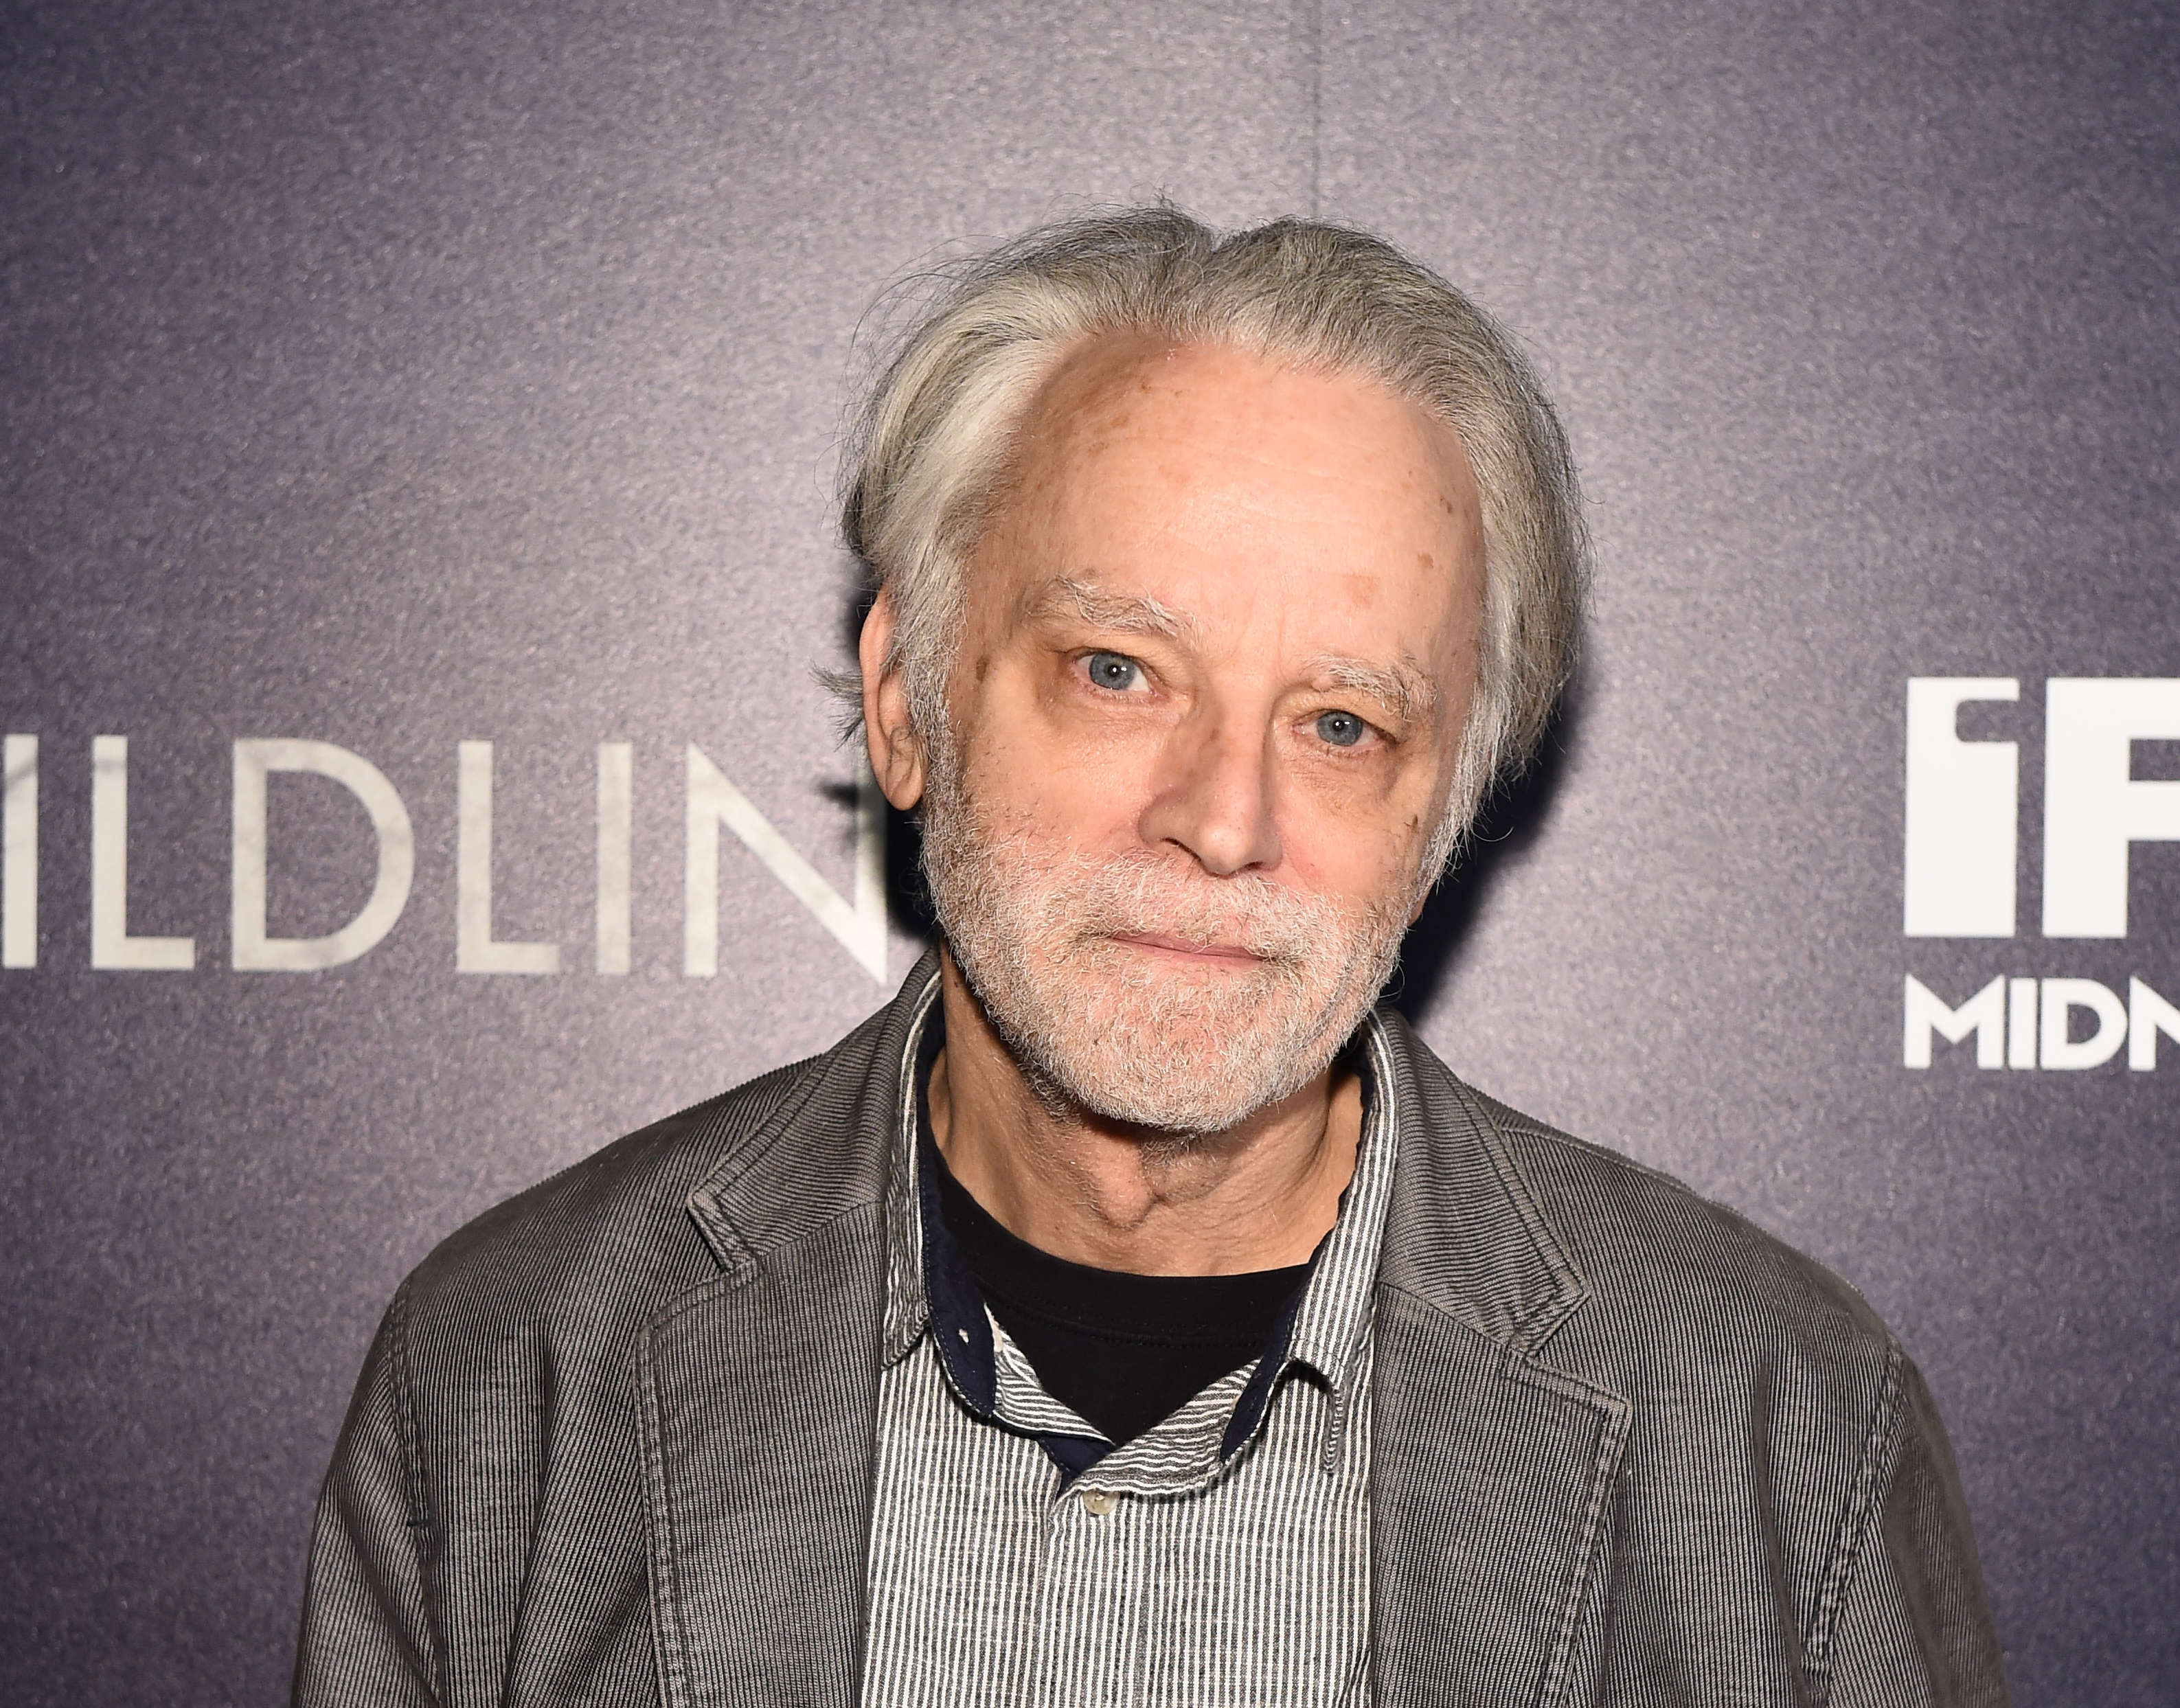 Brad Dourif attends "Wildling" New York Screening at iPic Theater on April 8, 2018 in New York City